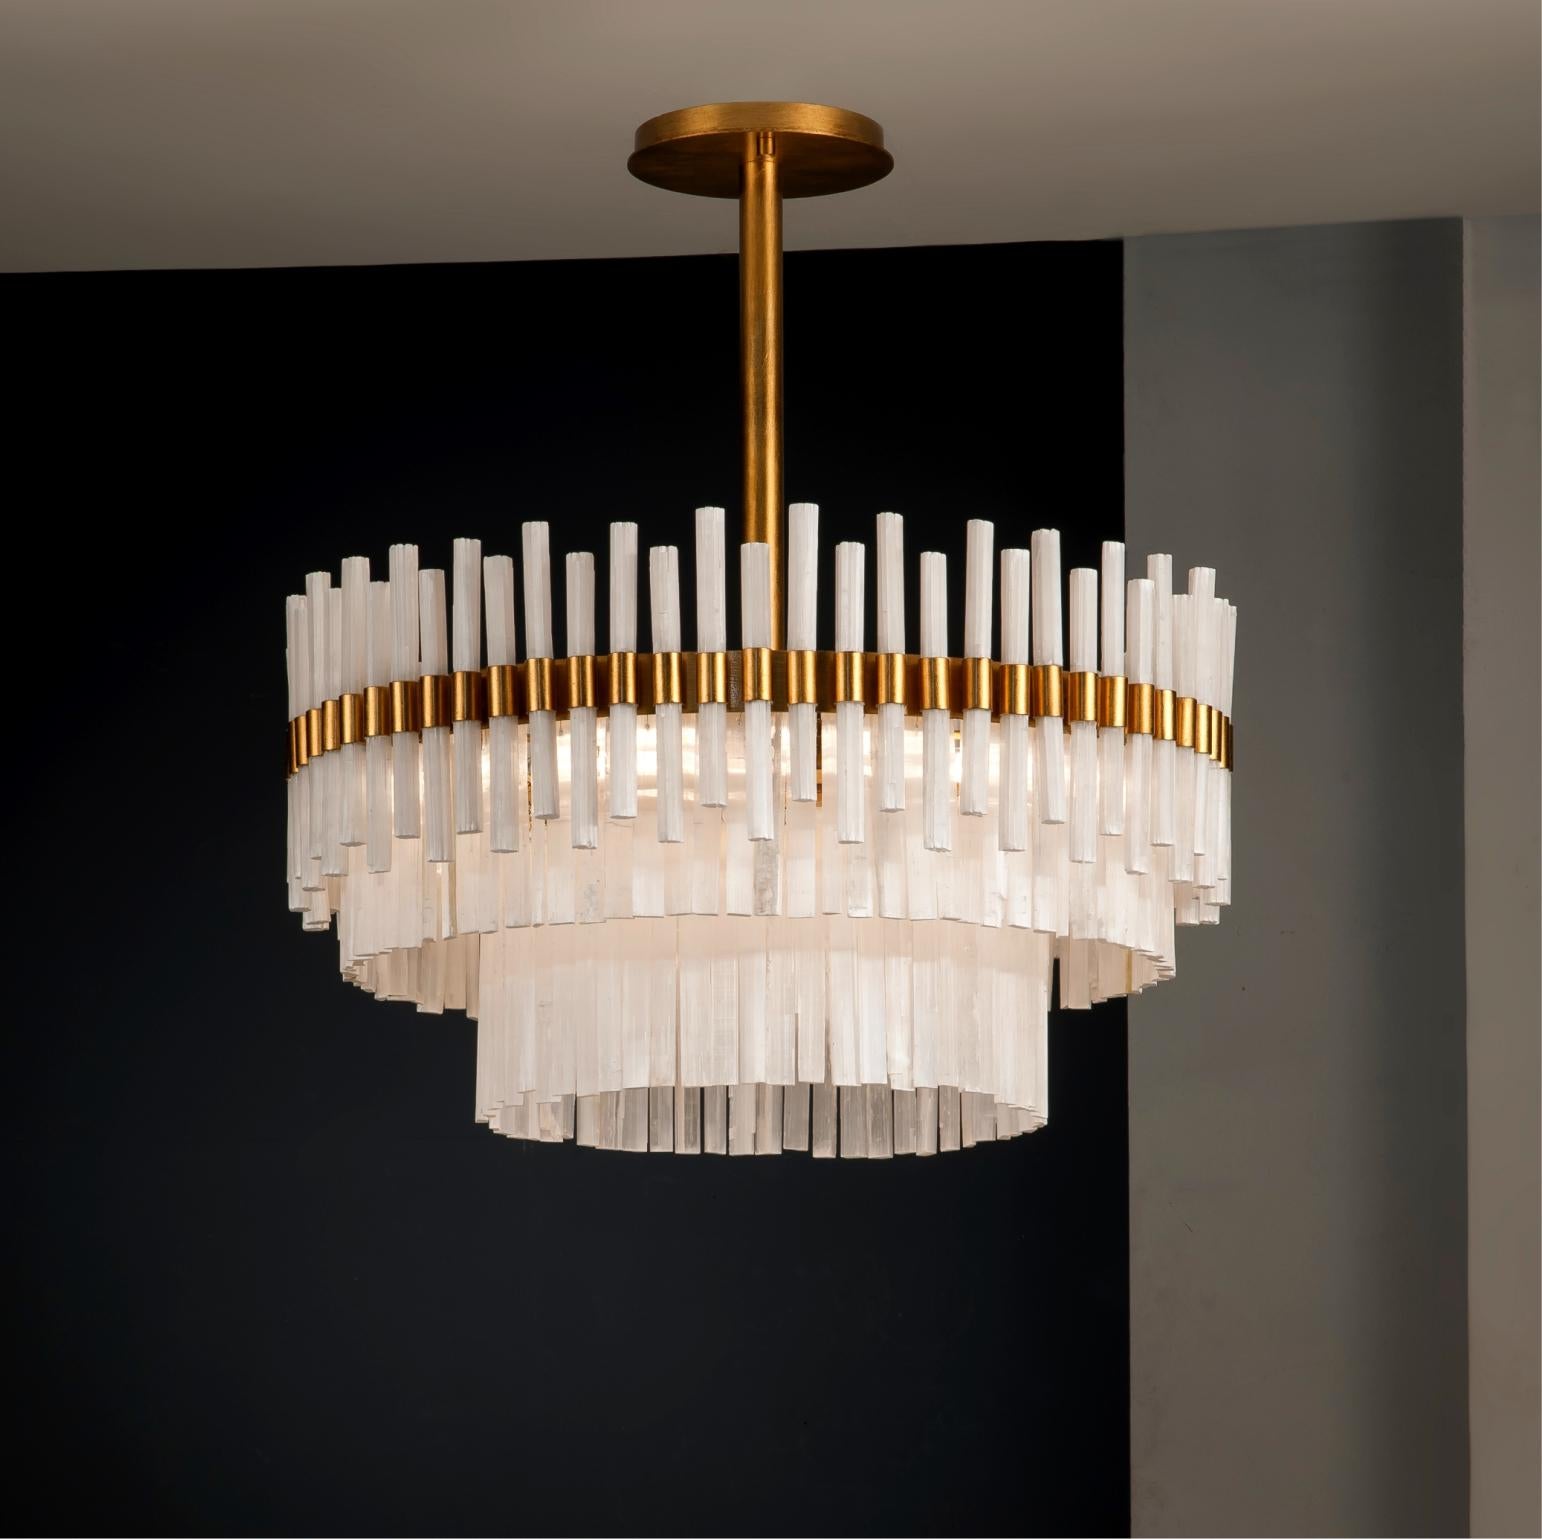 Large Selenite chandelier lamp by Aver
Dimensions: diameter 84 x height 50 cm.
Materials: aluminum plated with gold leaf. Natural selenite. 
Lighting: 12 x E14
Finish: Silver Veneer, Aged Silver Veneer, Gold Veneer, Aged Gold Veneer, Copper Veneer,